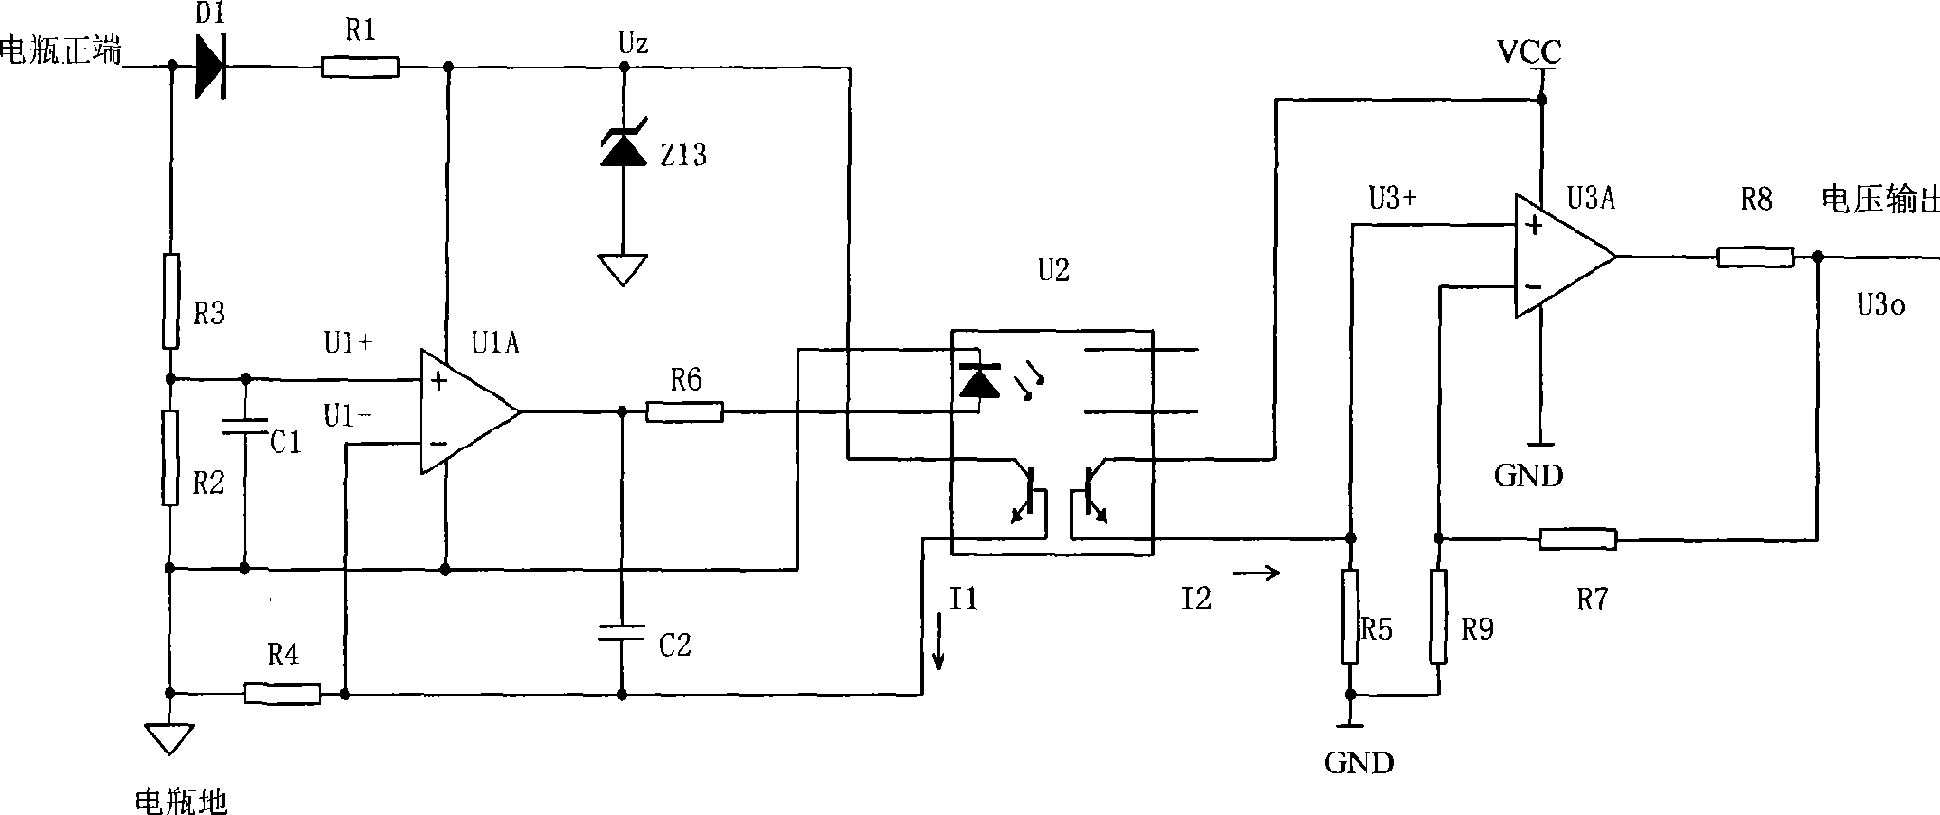 Battery jar voltage insulation test circuit based on linear optical coupler